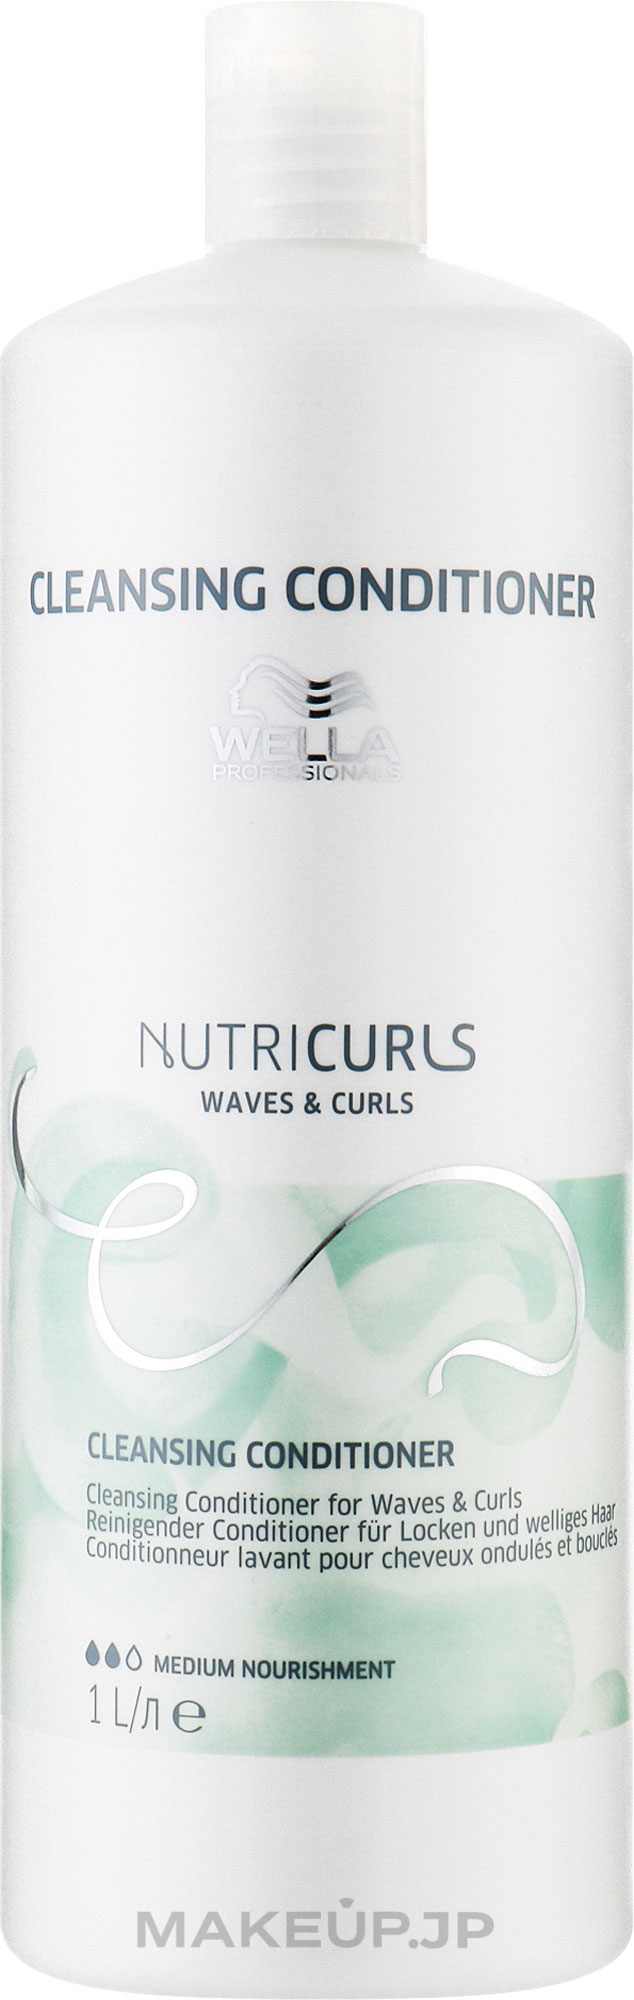 Conditioner for Wavy & Curly Hair - Wella Professionals Nutricurls Cleansing Conditioner for Waves and Curls — photo 1000 ml